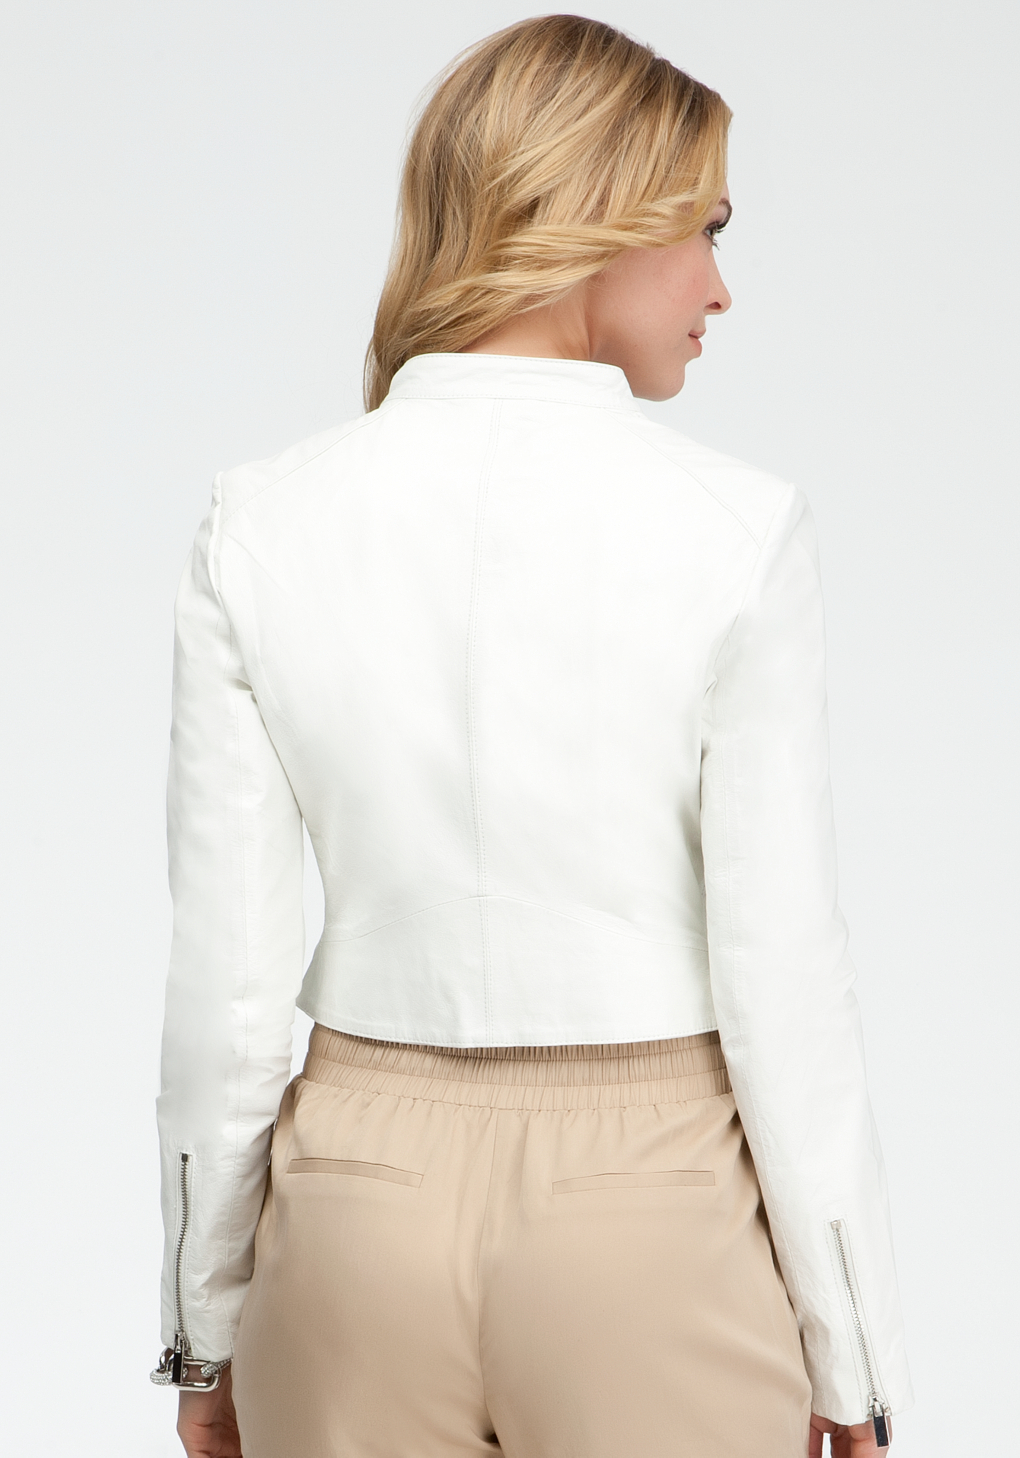 Lyst - Bebe Cali Cropped Leather Jacket in White